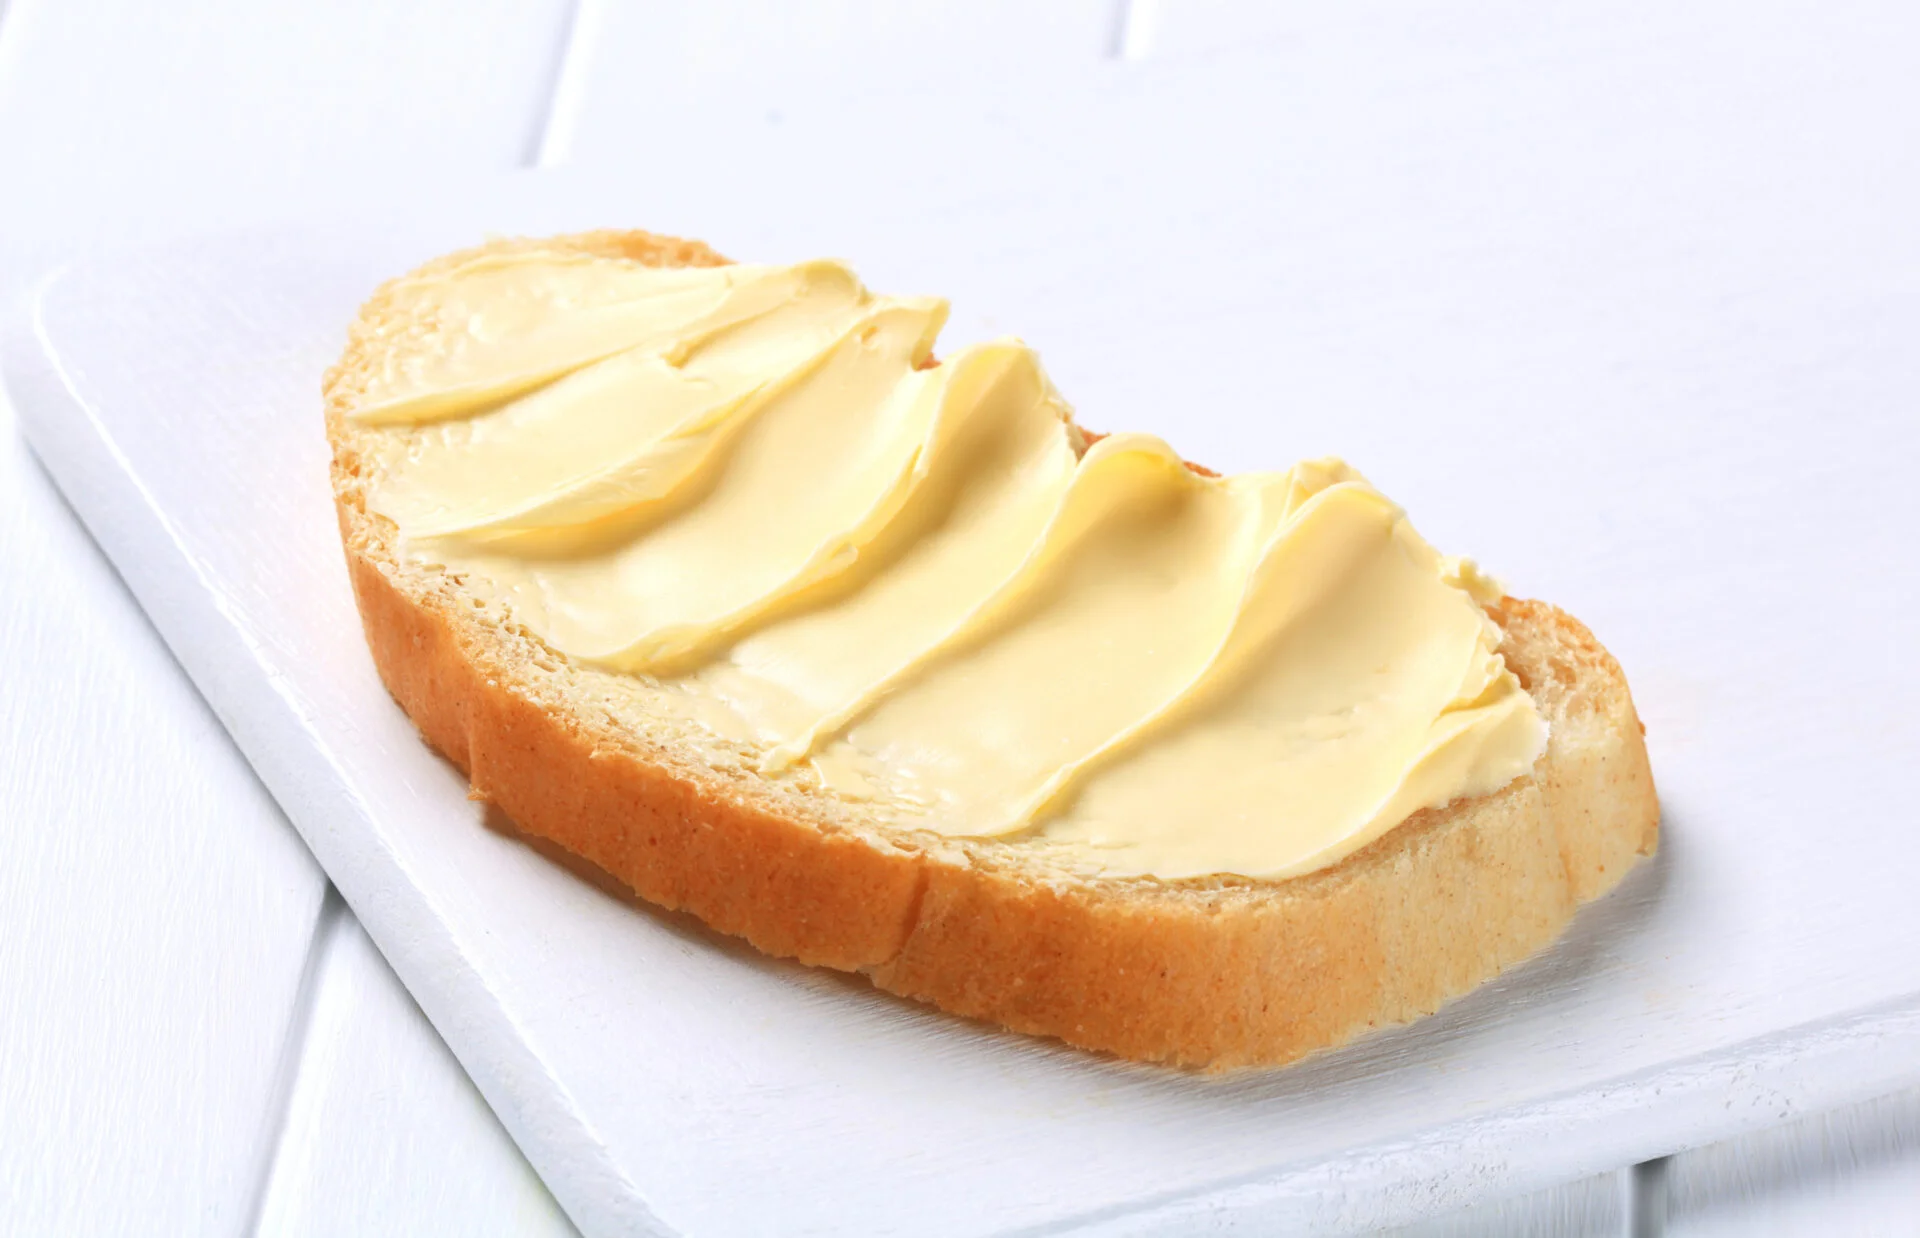 Slice of white bread with butter